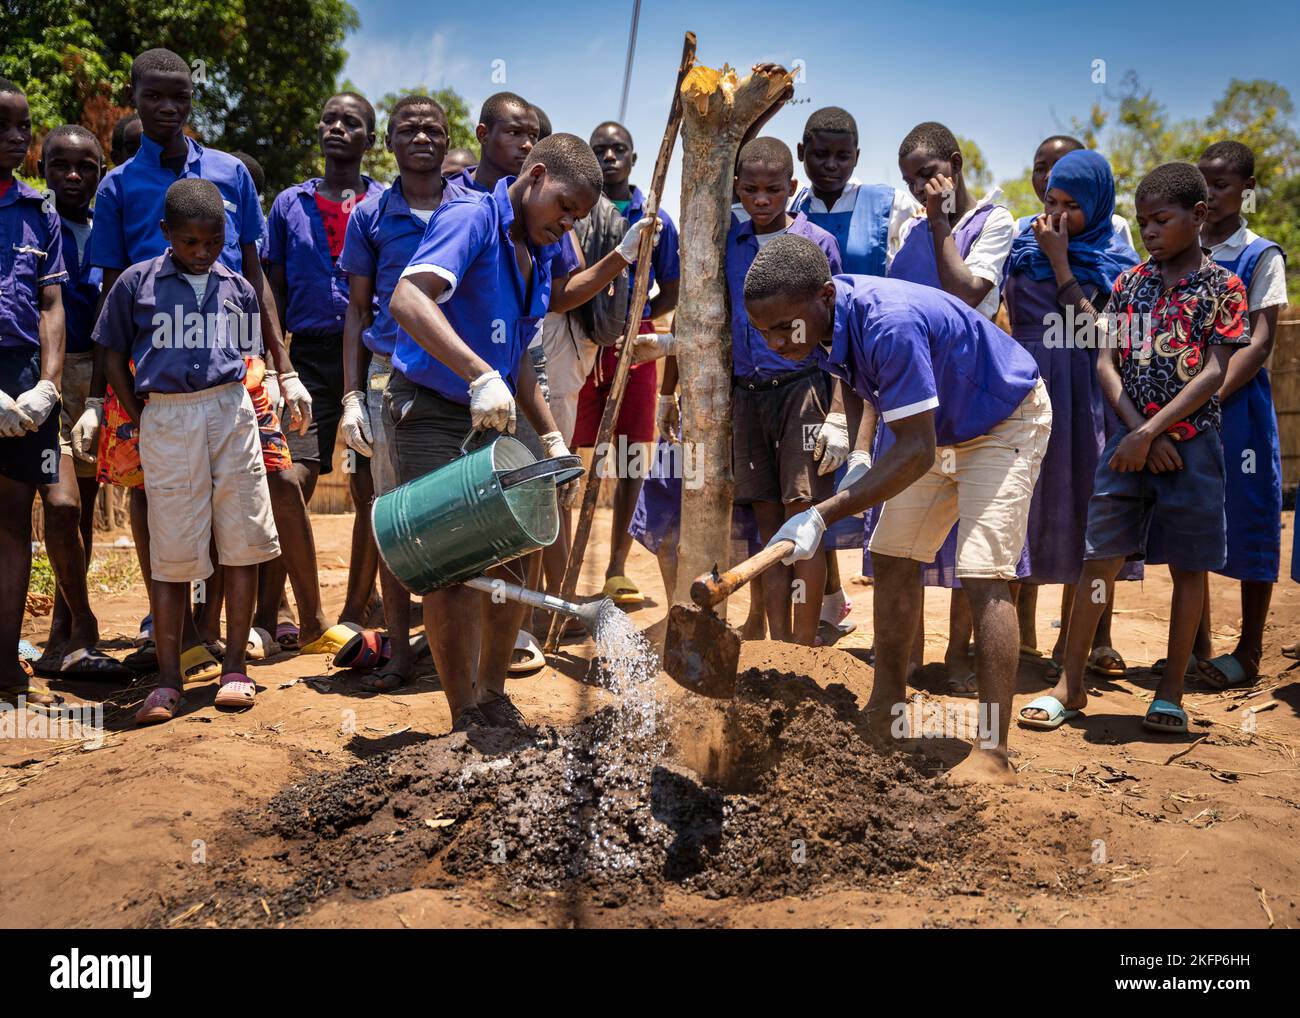 Secondary school children in Malawi demonstrate how to plant a tree, as part of their environmental conservation club Stock Photo